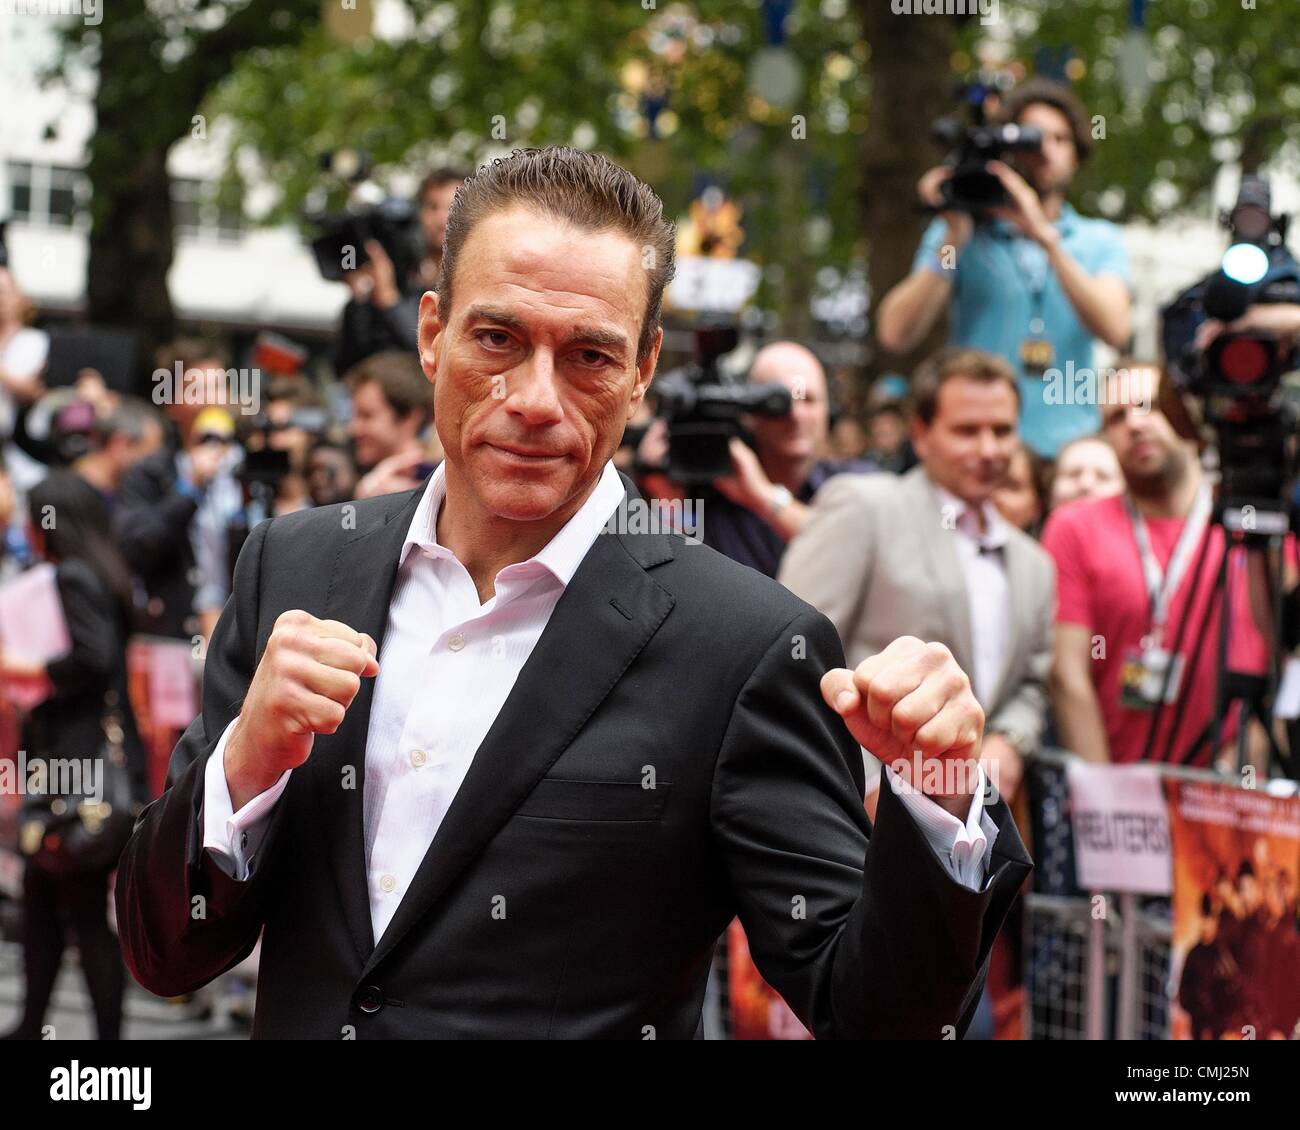 13th Aug 2012. Jean-Claude Van Damme attends UK Premiere of the film Expendables 2 on 13/08/2012 at The Empire Leicester Square, London. Persons pictured: Jean-Claude Van Damme . Picture by Julie Edward Credit:  JEP Celebrity Photos / Alamy Live News Stock Photo